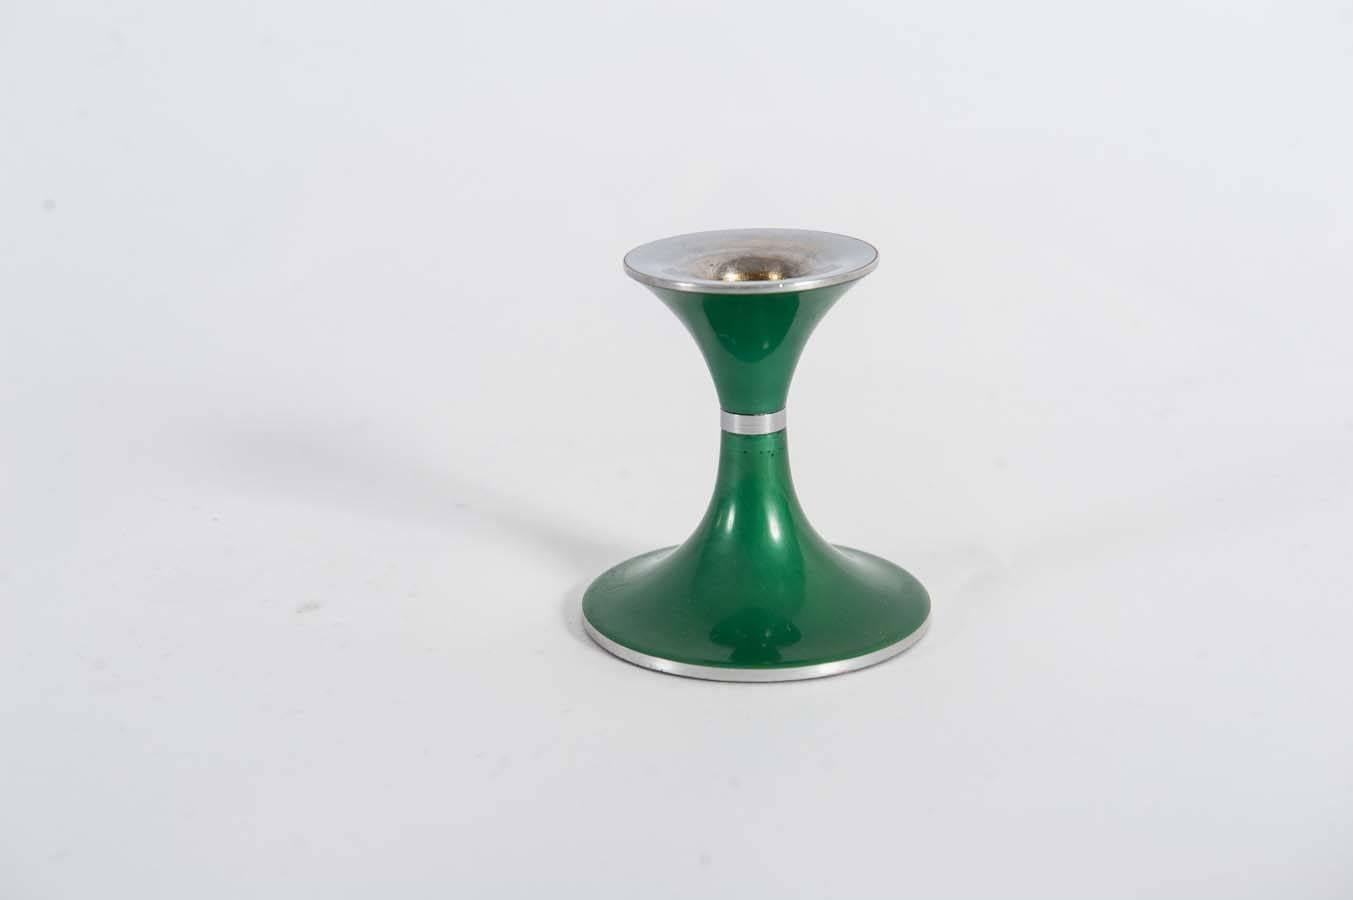 This pair of candlesticks is made of aluminium with a layer of green enamel. 
They are made by Emalox Norway and were sold by Quist Präsente which is also marked on the bottom.